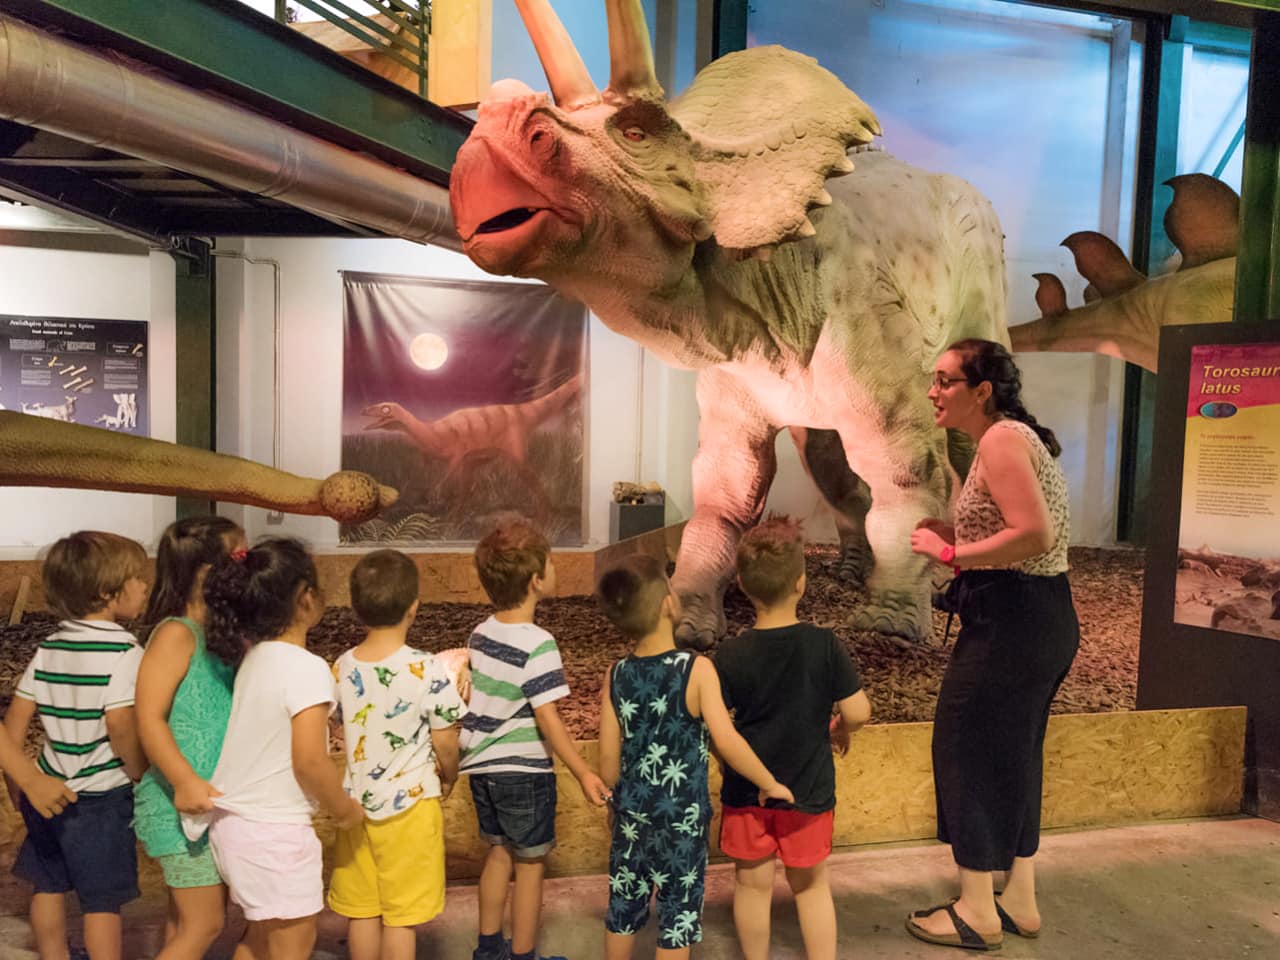 Natural History Museum Heraklion, Explore The Natural Environment Of Crete, things to do heraklion crete, activities heraklion crete, what to do family heraklion, families activities heraklion crete